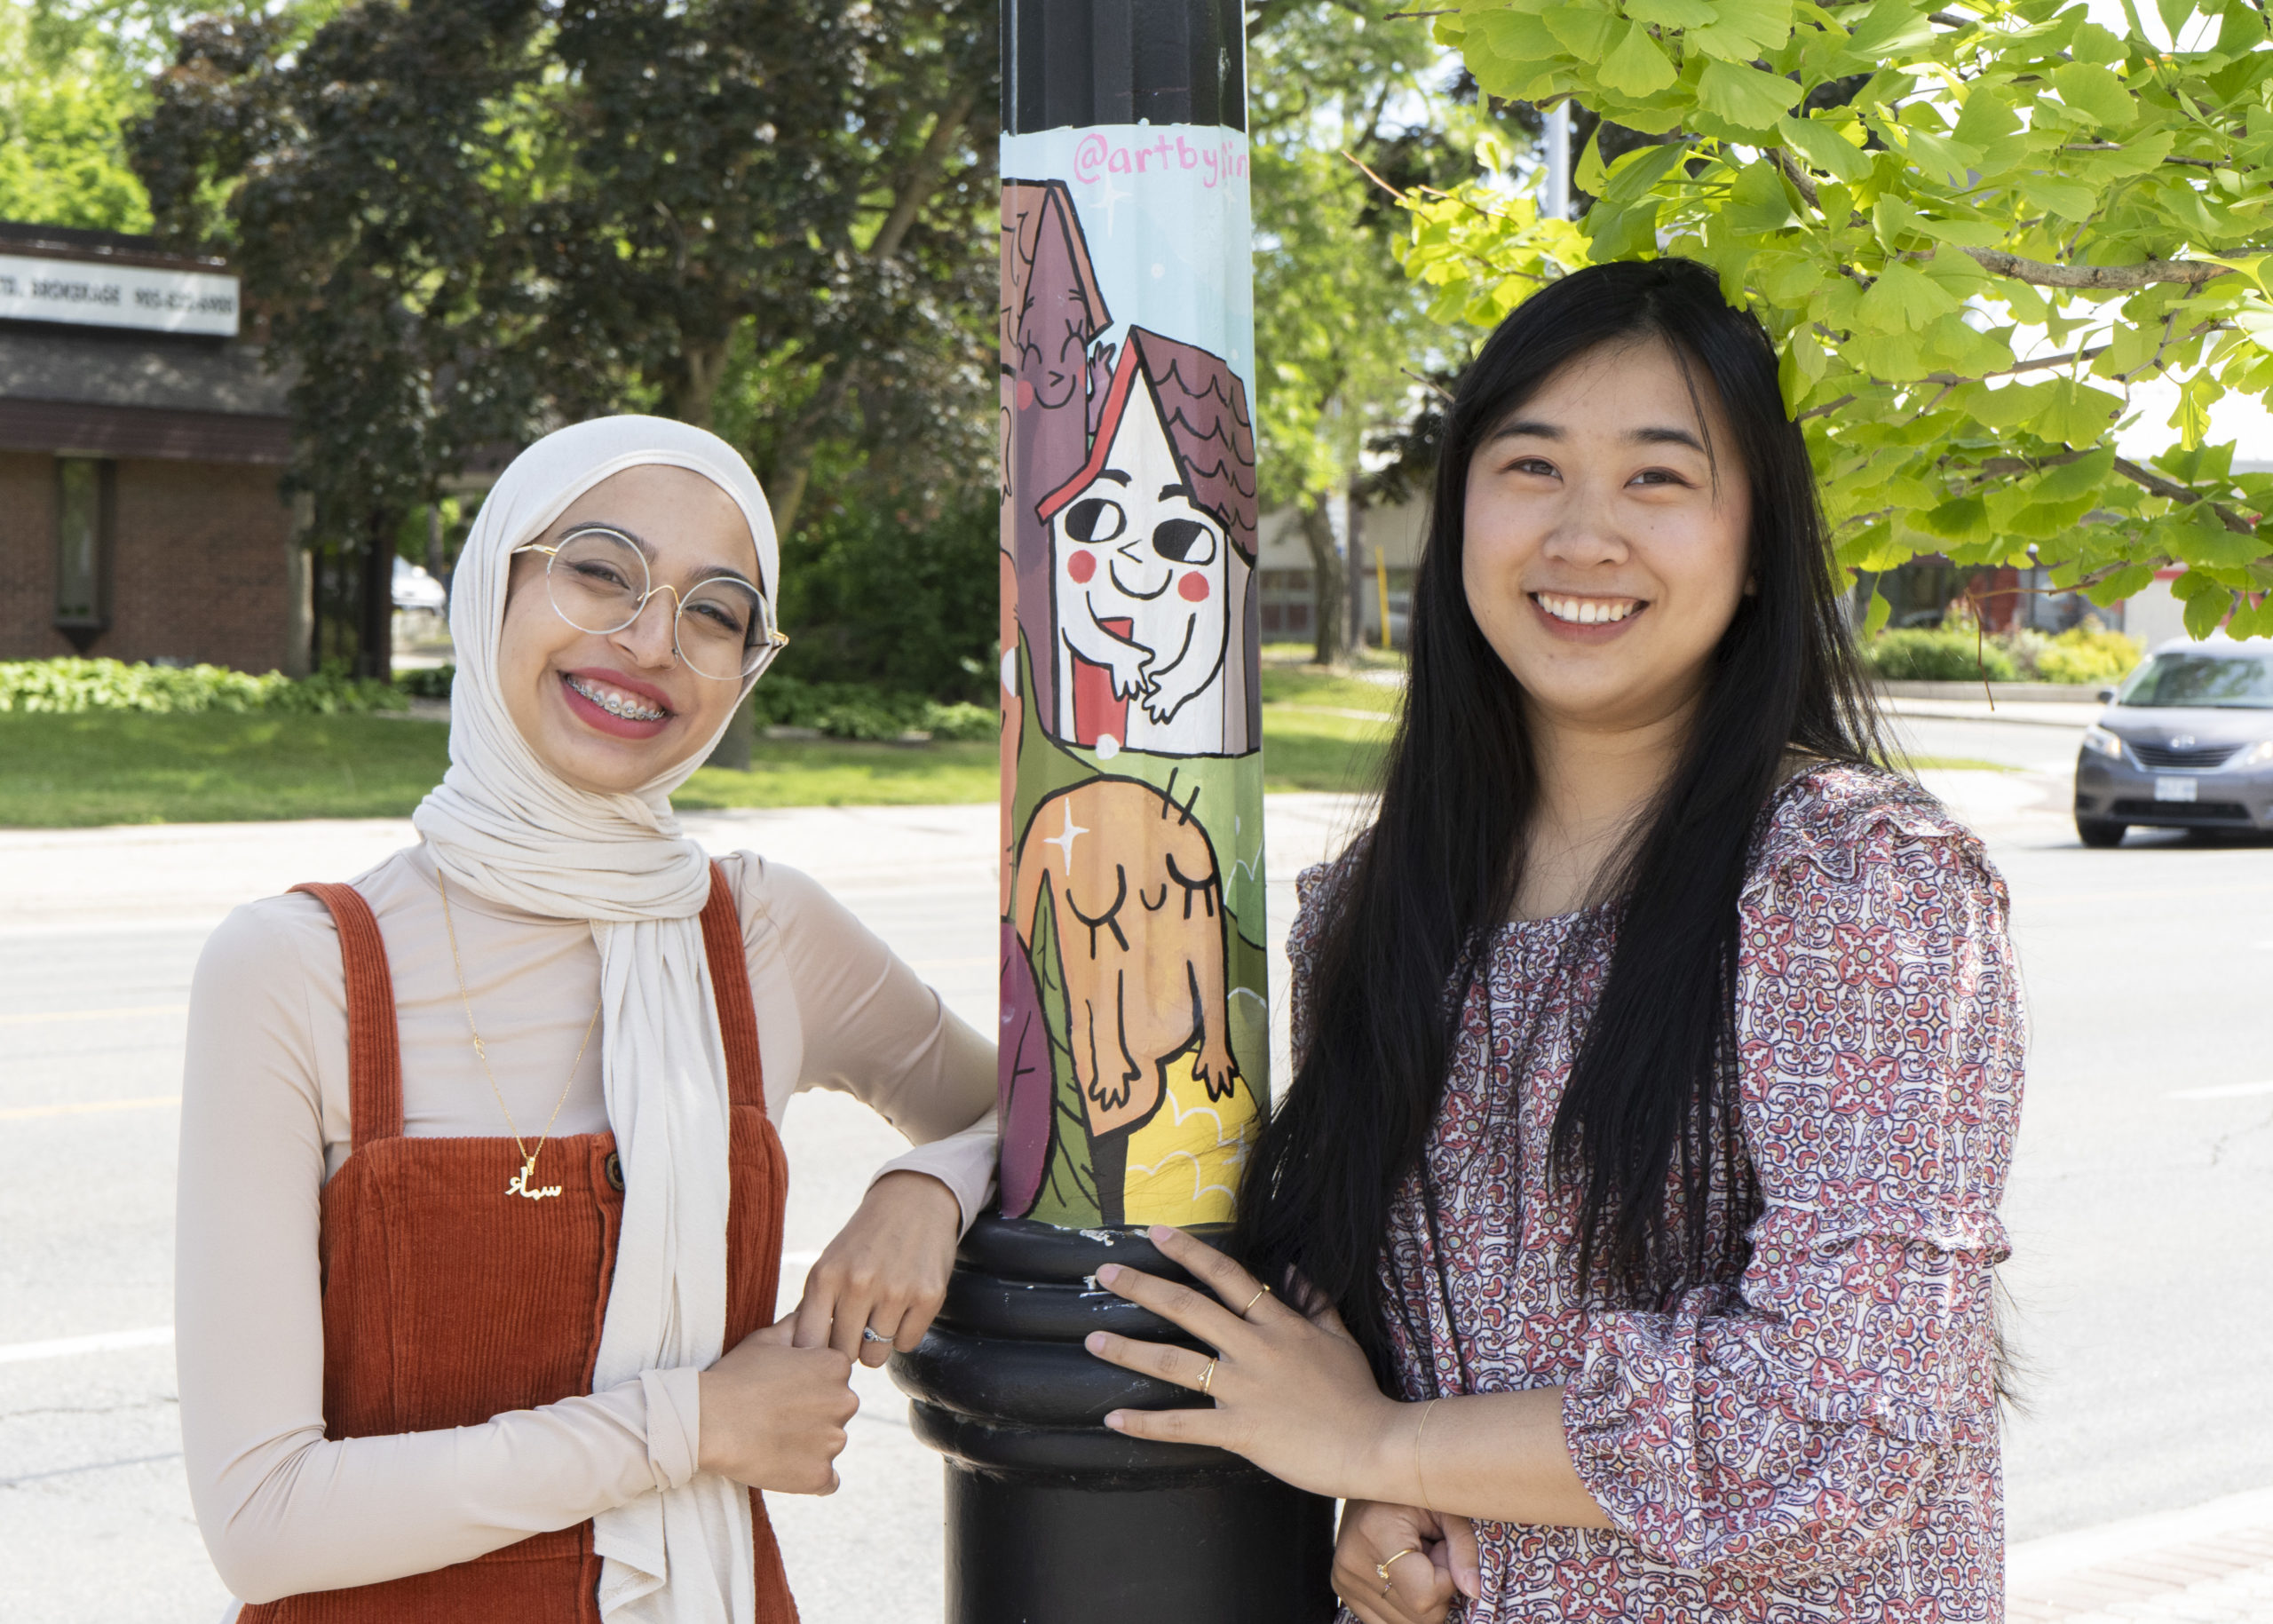 Artists Sima Naseem and Yen Linh Thai pose with their lamp post murals